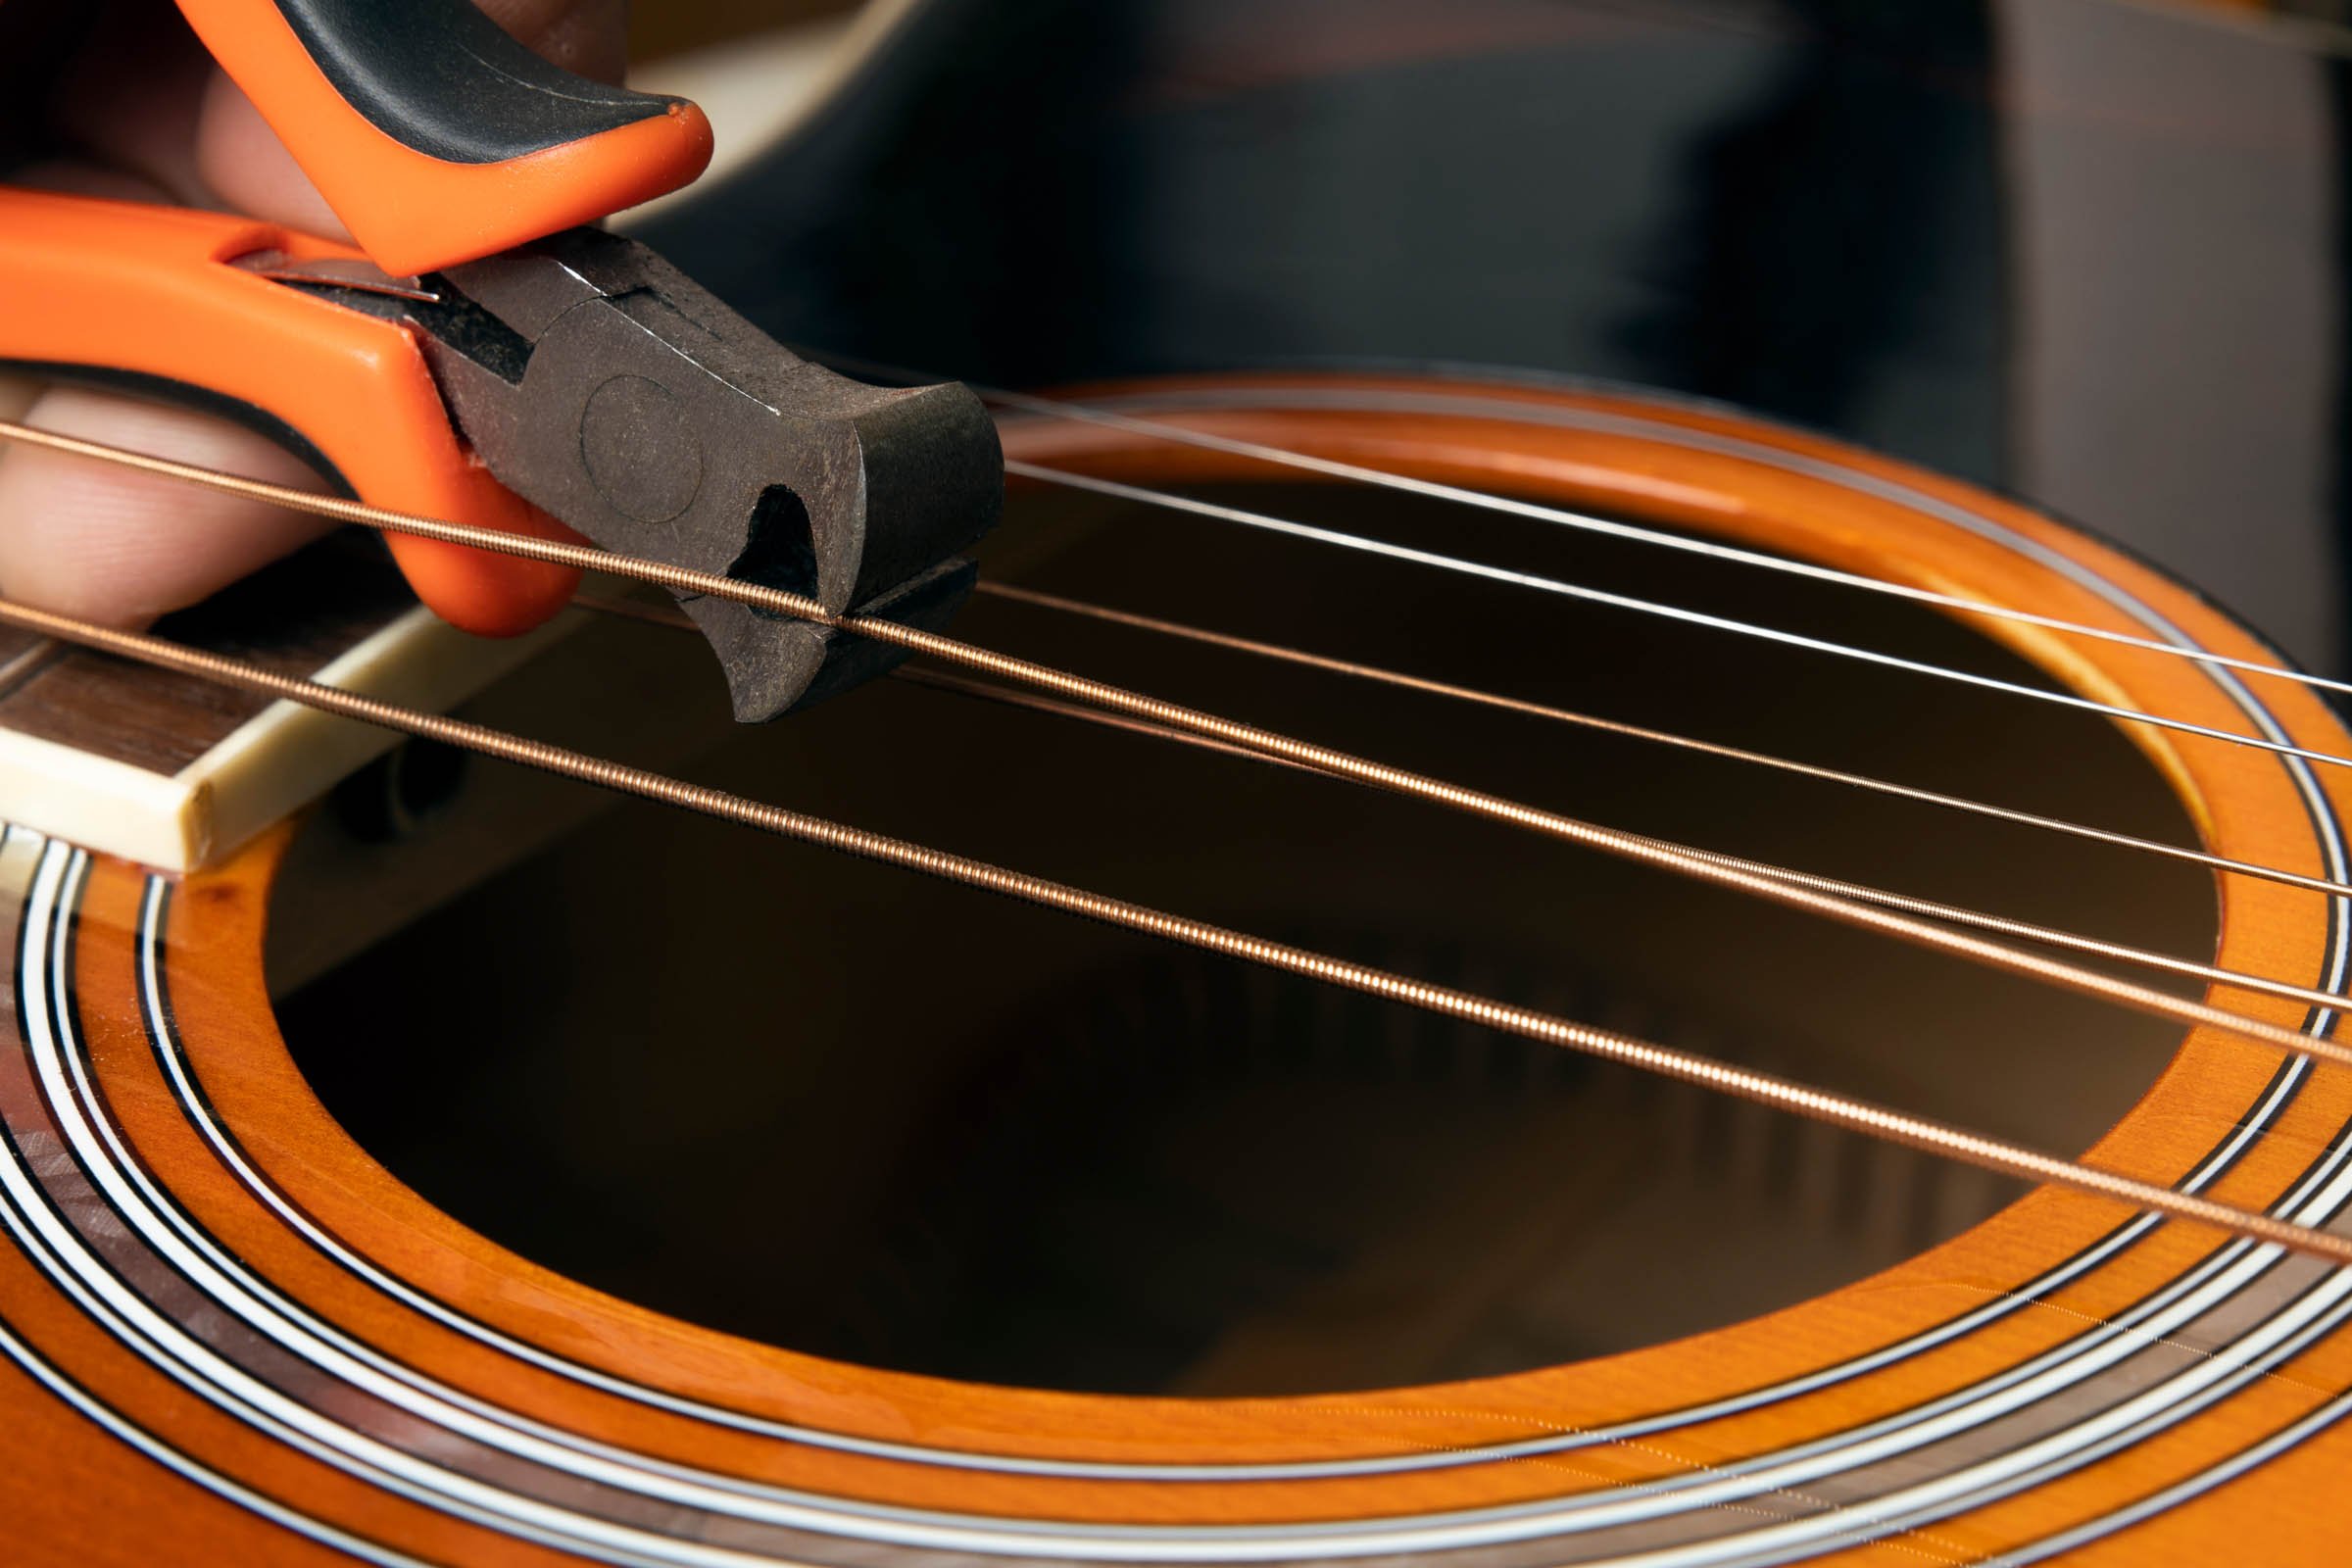 fixing the guitar strings